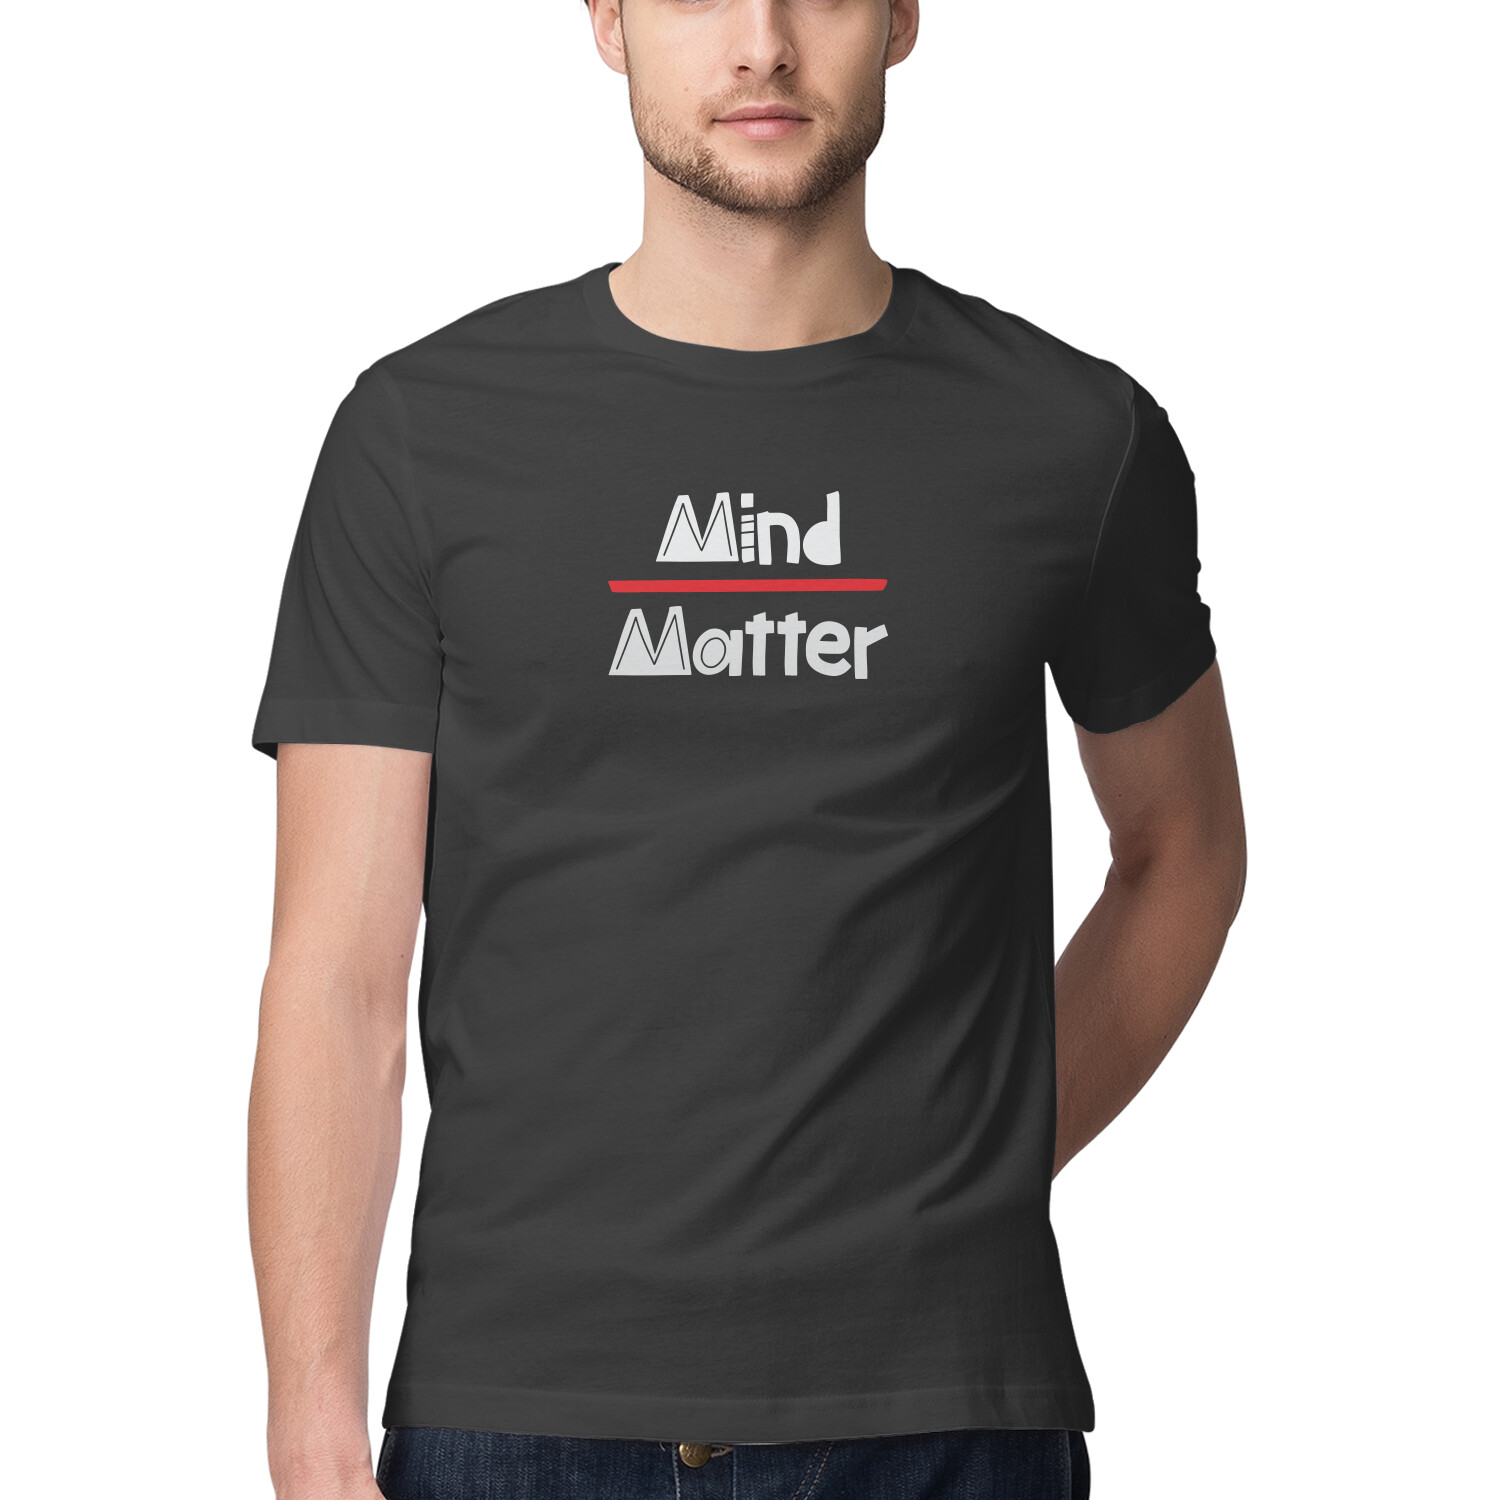 mind over matter, Funny T-shirt quotes and sayings - Manmarzee